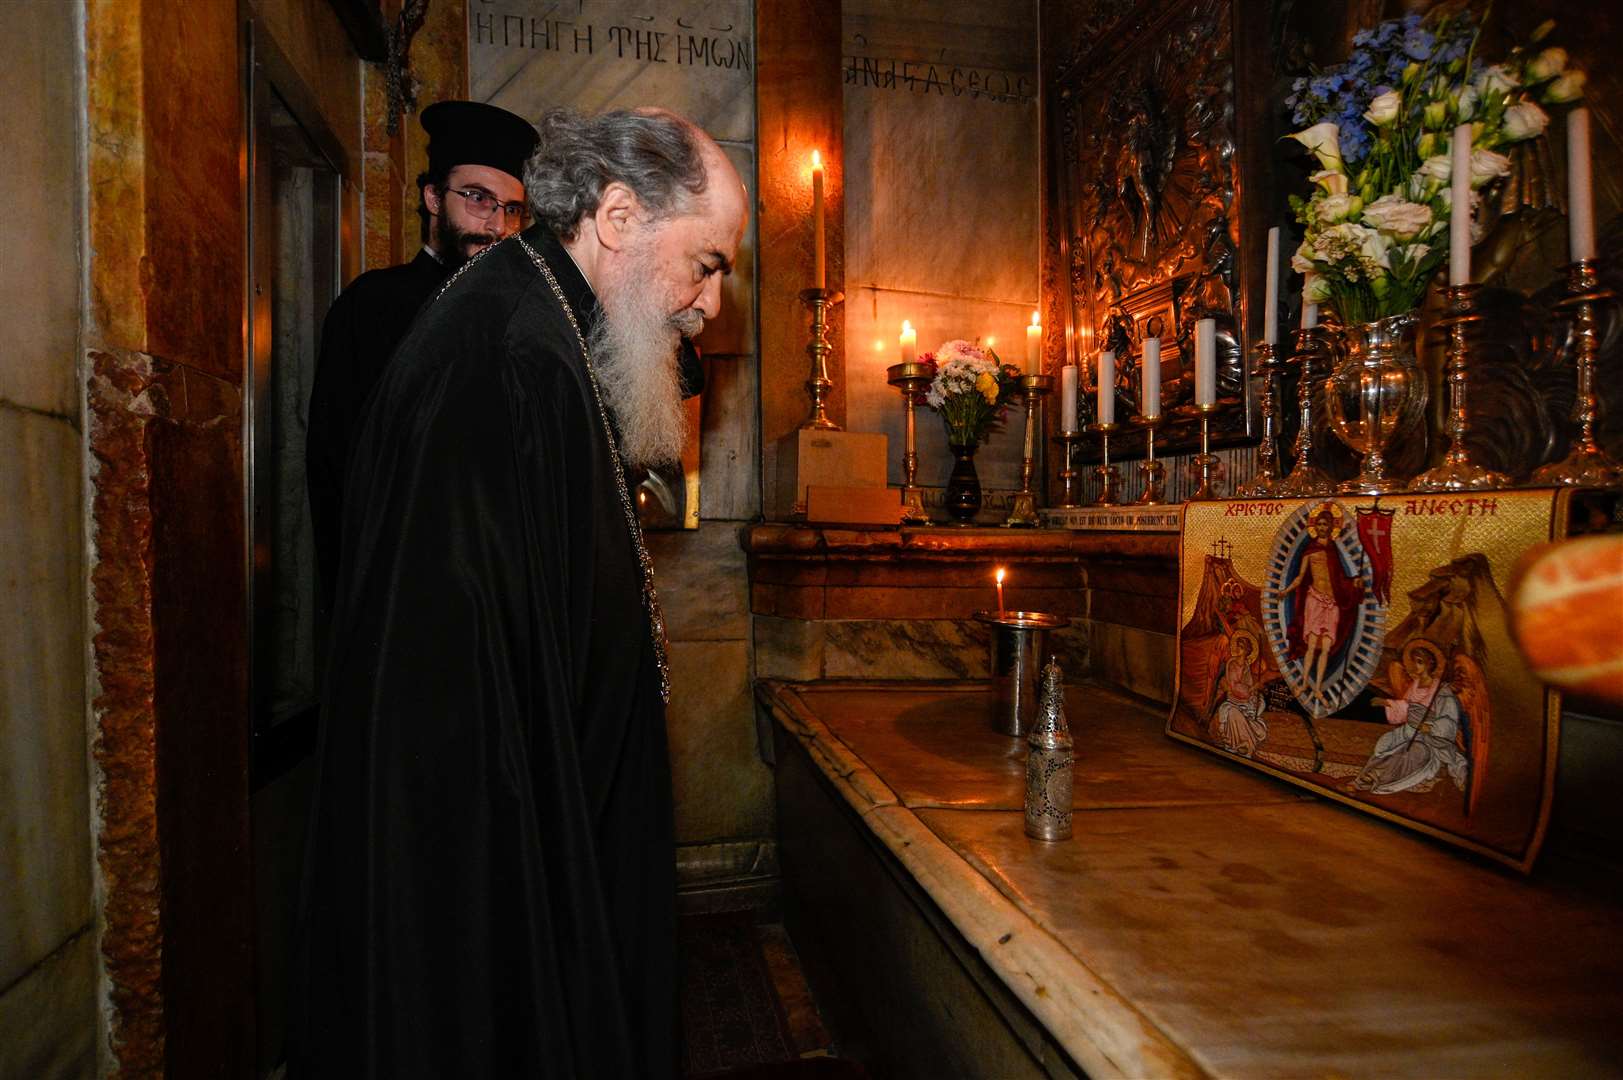 The Patriarch of Jerusalem, His Beatitude Patriarch Theophilos III, with the chrism oil in a silver urn at the Tomb of Jesus in Jerusalem (Patriarchate of Jerusalem/Buckingham Palace/PA)